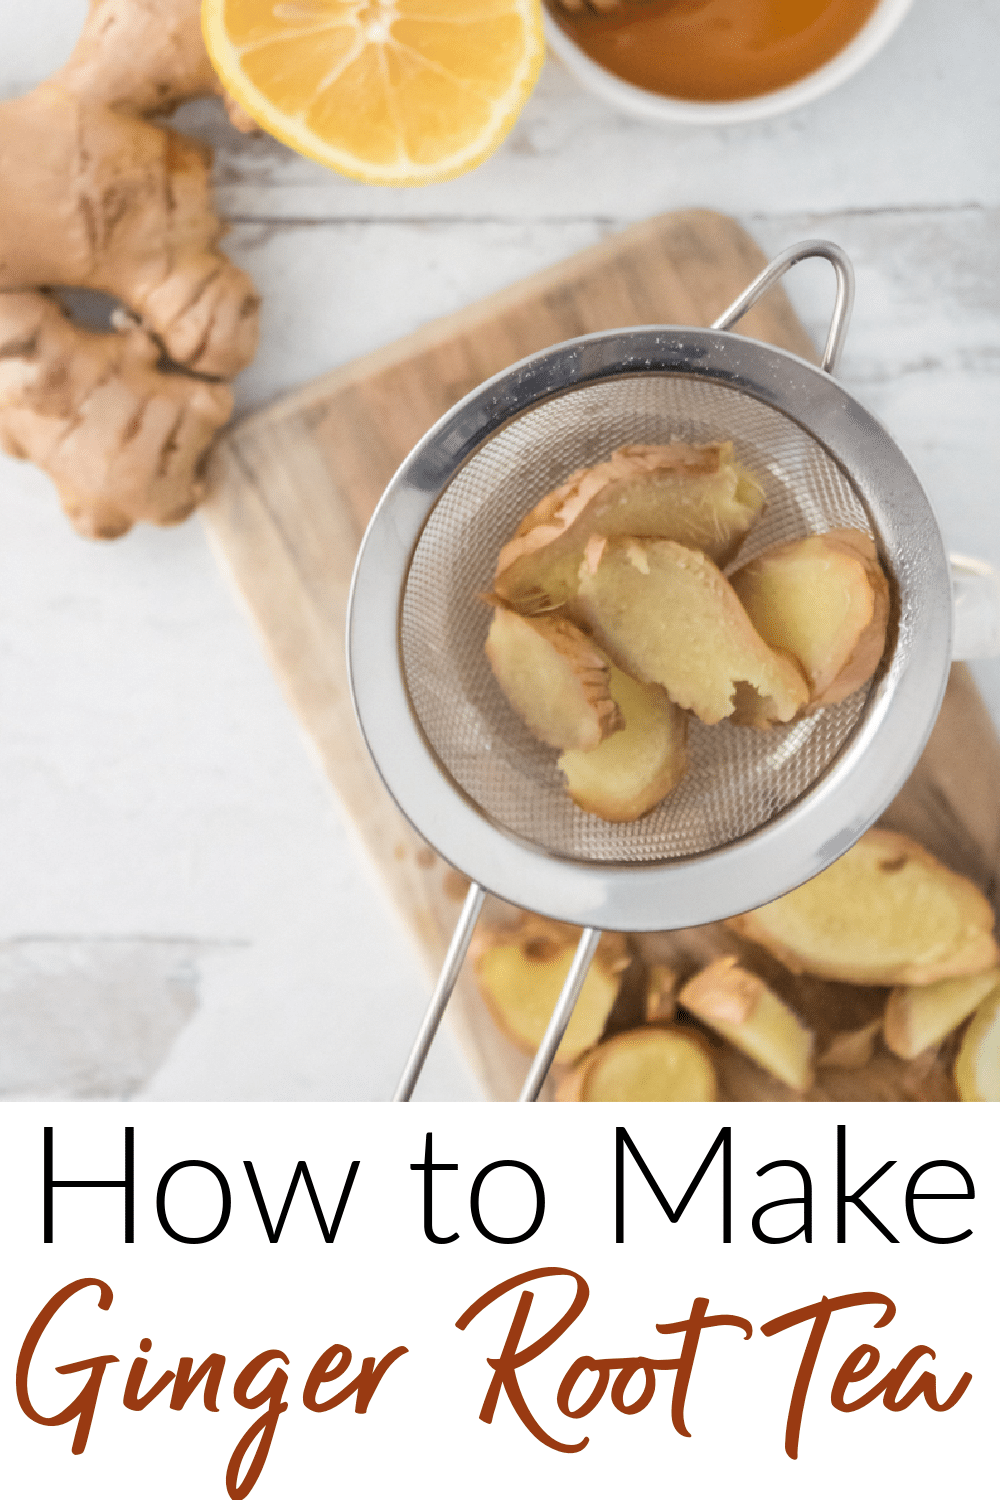 How to make Ginger root tea 1